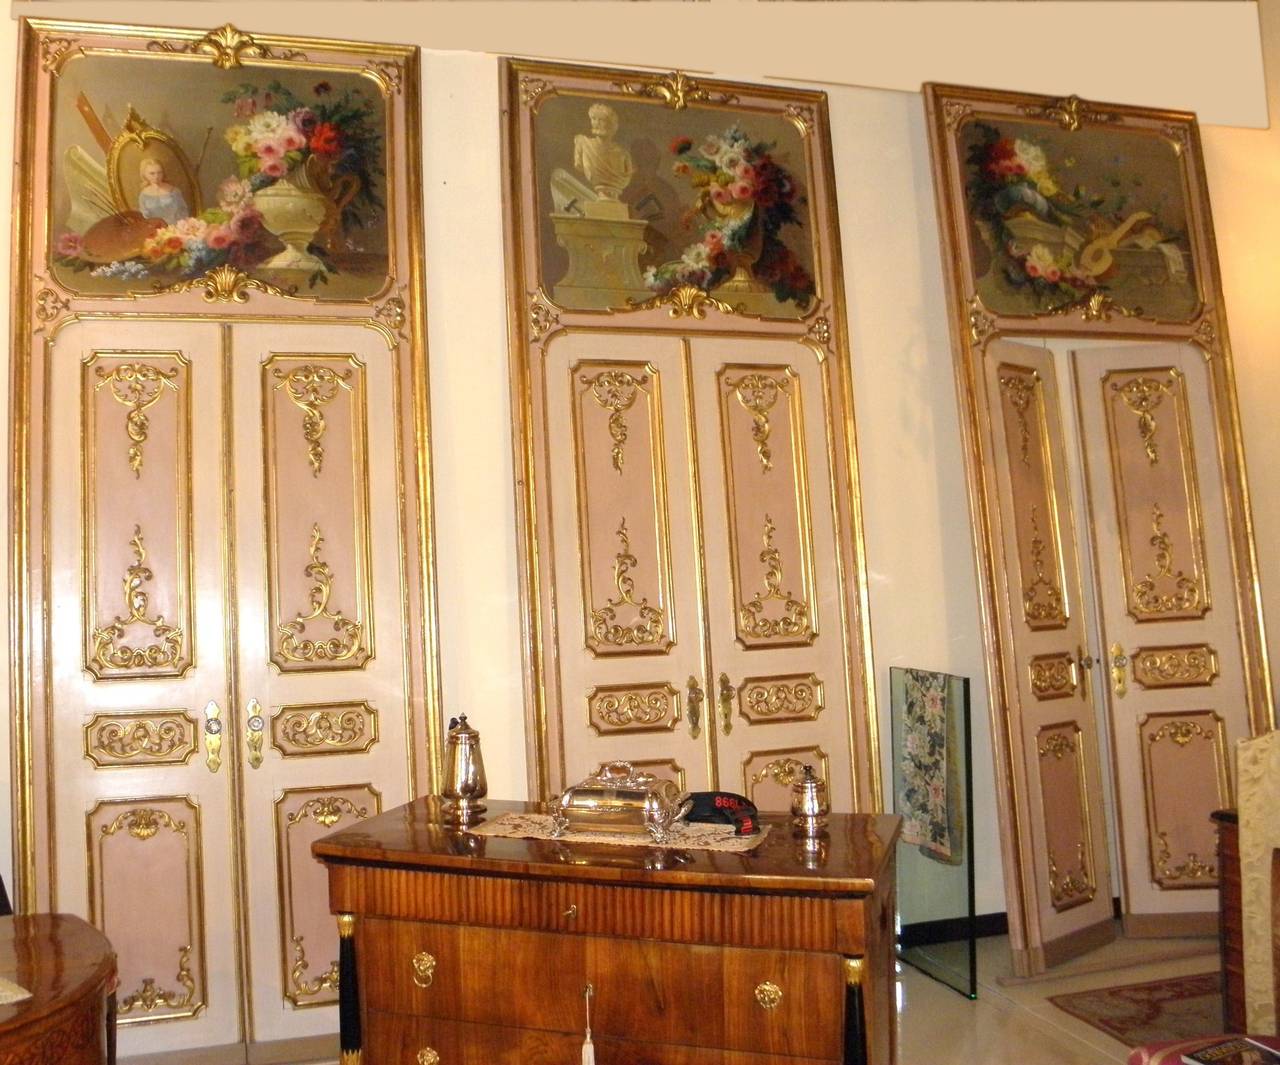 Series of four lacquered and gilded double doors made circa 1750, complete with frame and paintings on the top. The front has a very fine carved foliage in giltwood, the back is only lacquered and gilded with no carving. The four paintings, oil on